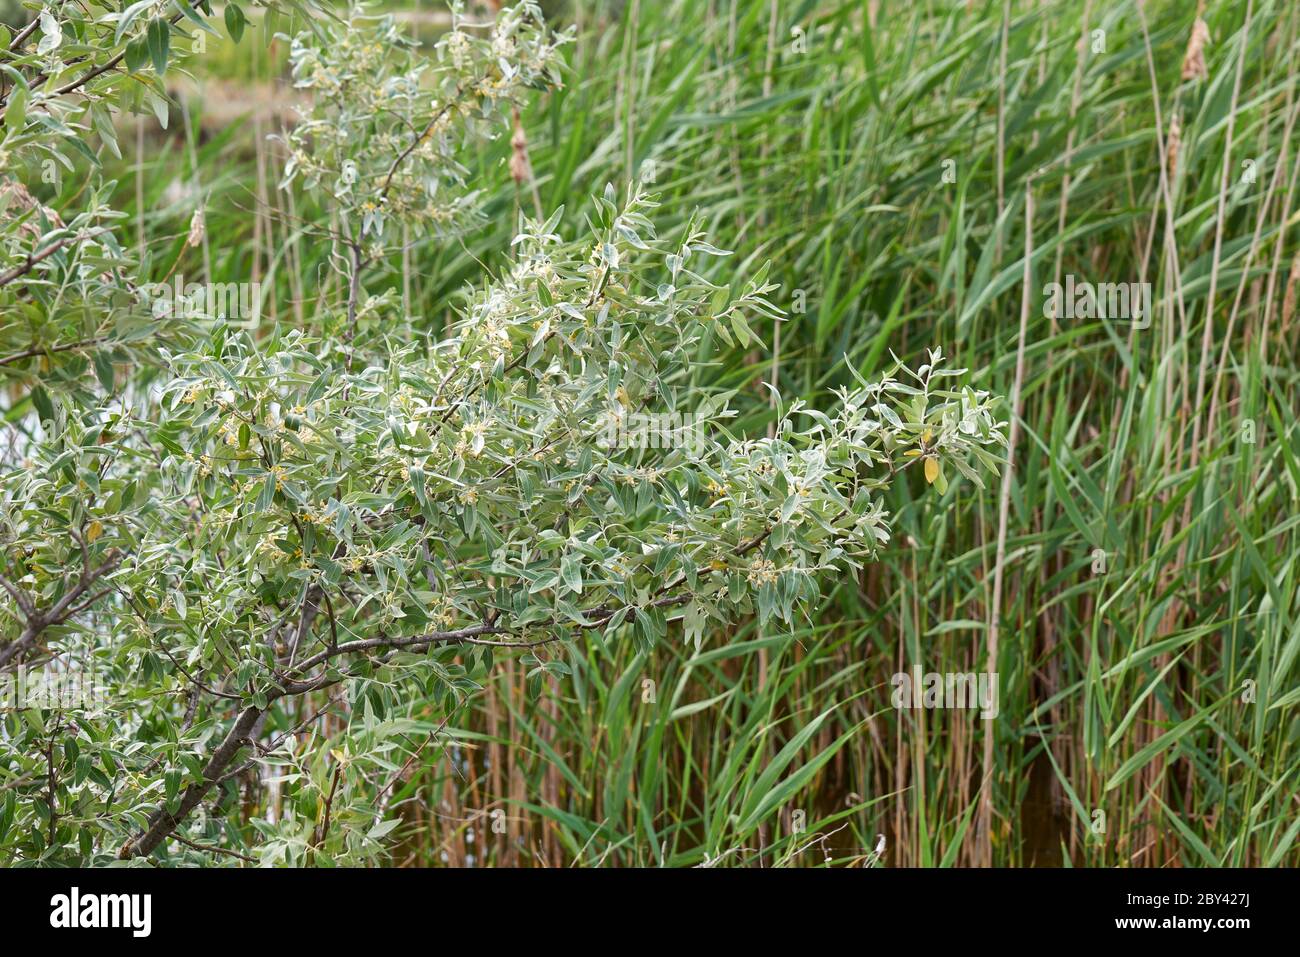 branch of silver goof with yellow flowers and green leaves, close up Stock Photo